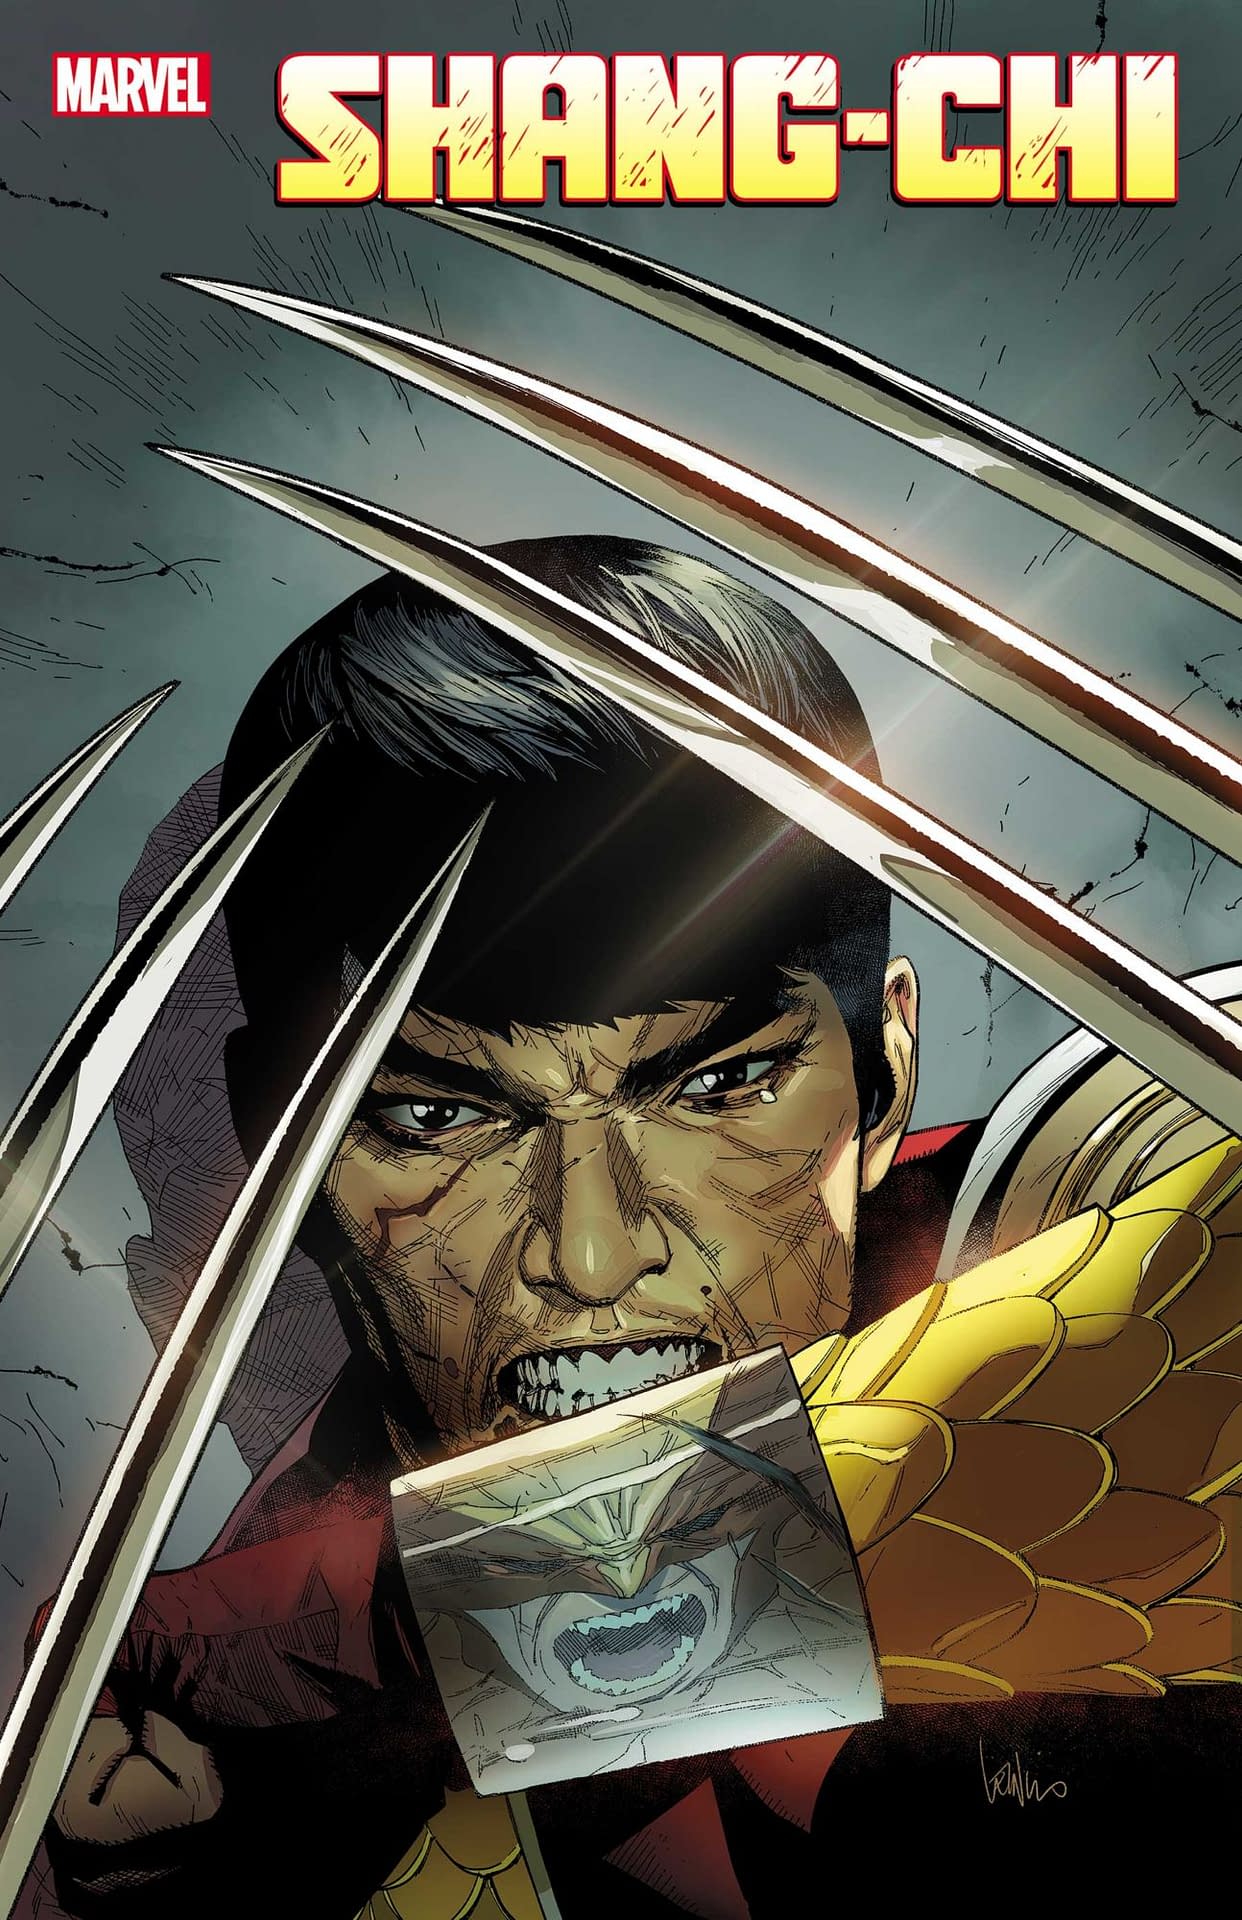 It's Shang-Chi Vs Wolverine From Marvel in July